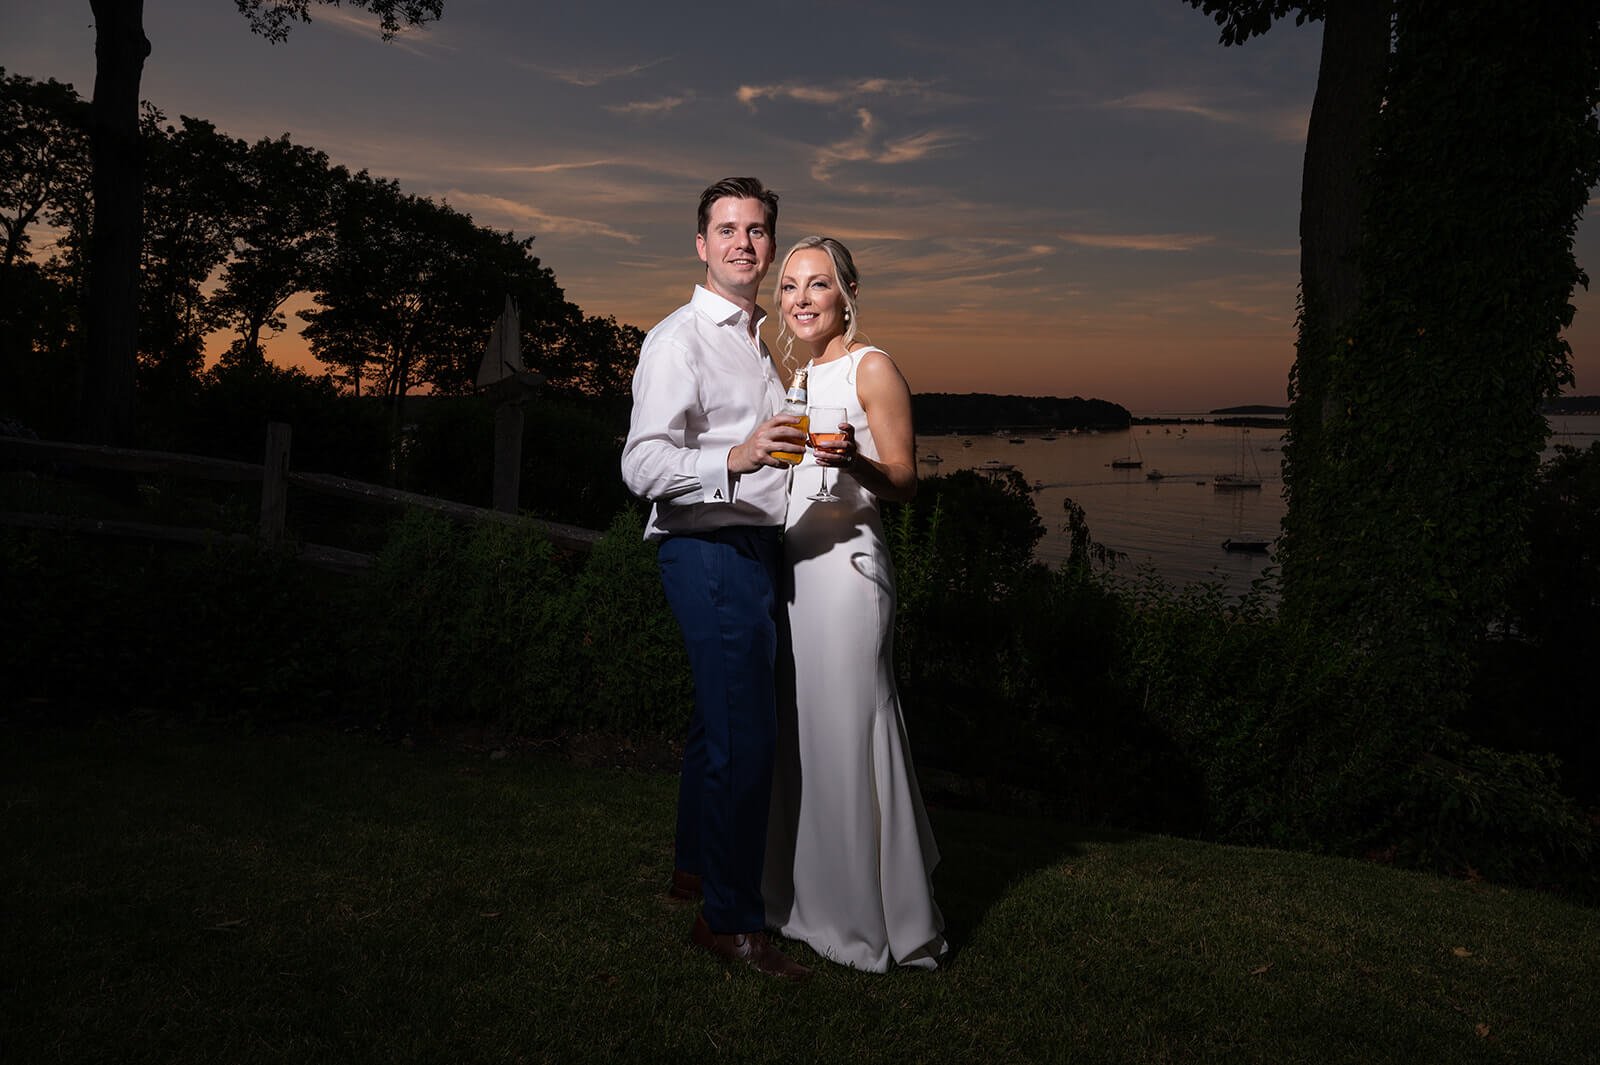 Sunset bride and groom portraits at their Long Island wedding, Sunset bride and groom portraits, Long Island, overlooking Huntington Bay